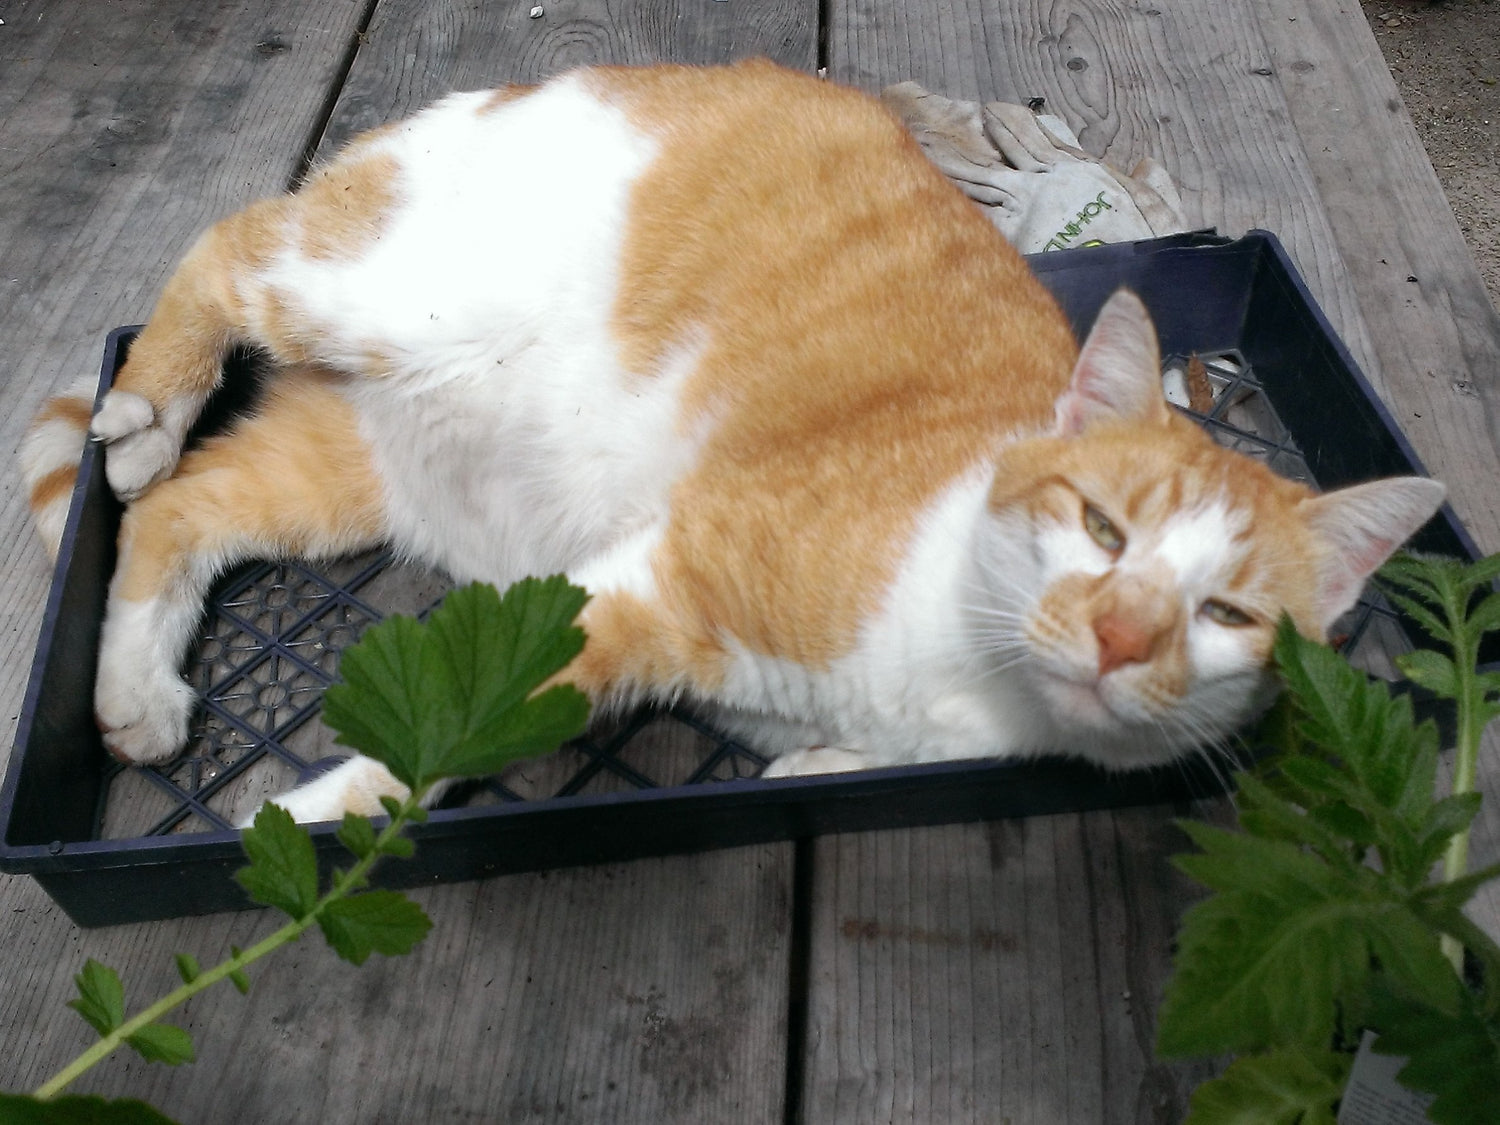 Alley Cat relaxing in a seedling tray